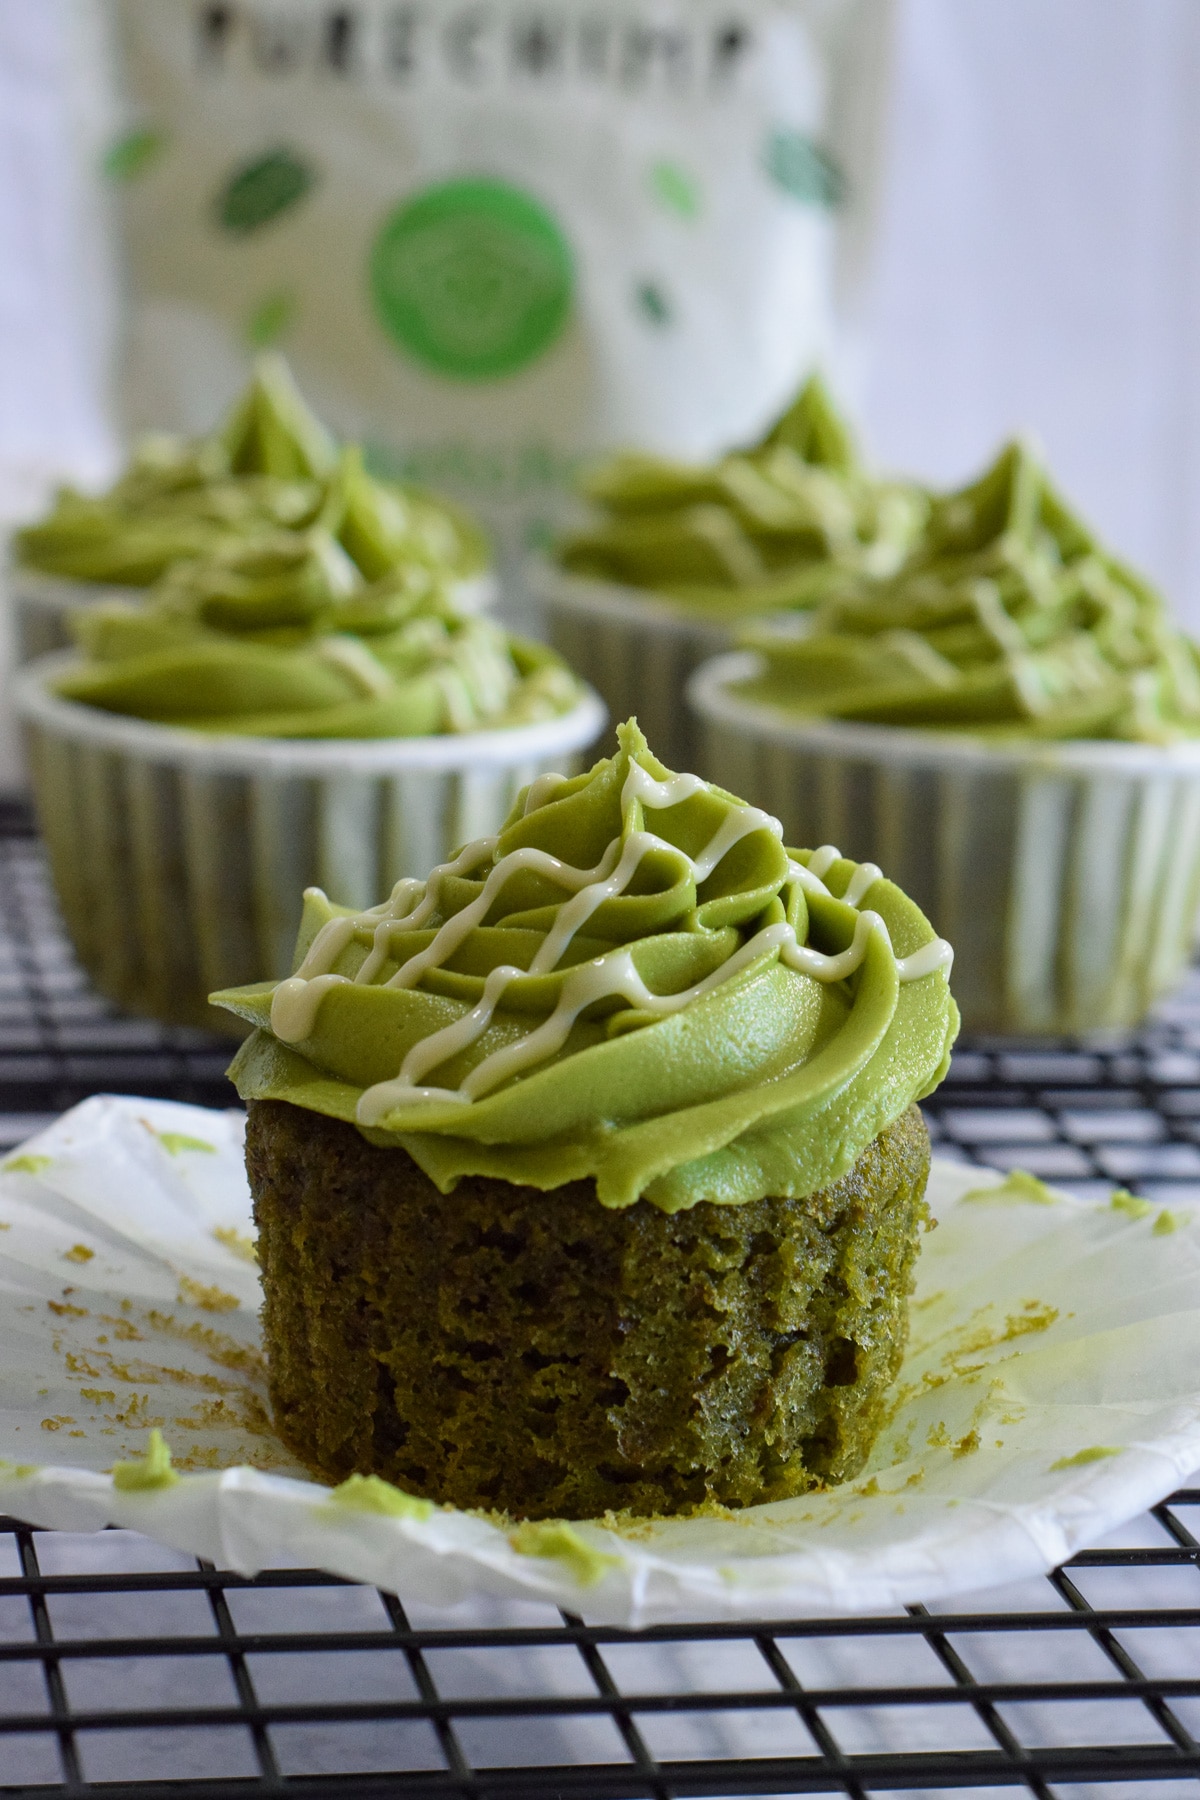 Matcha green tea cupcakes with a matcha buttercream frosting and white chocolate drizzle